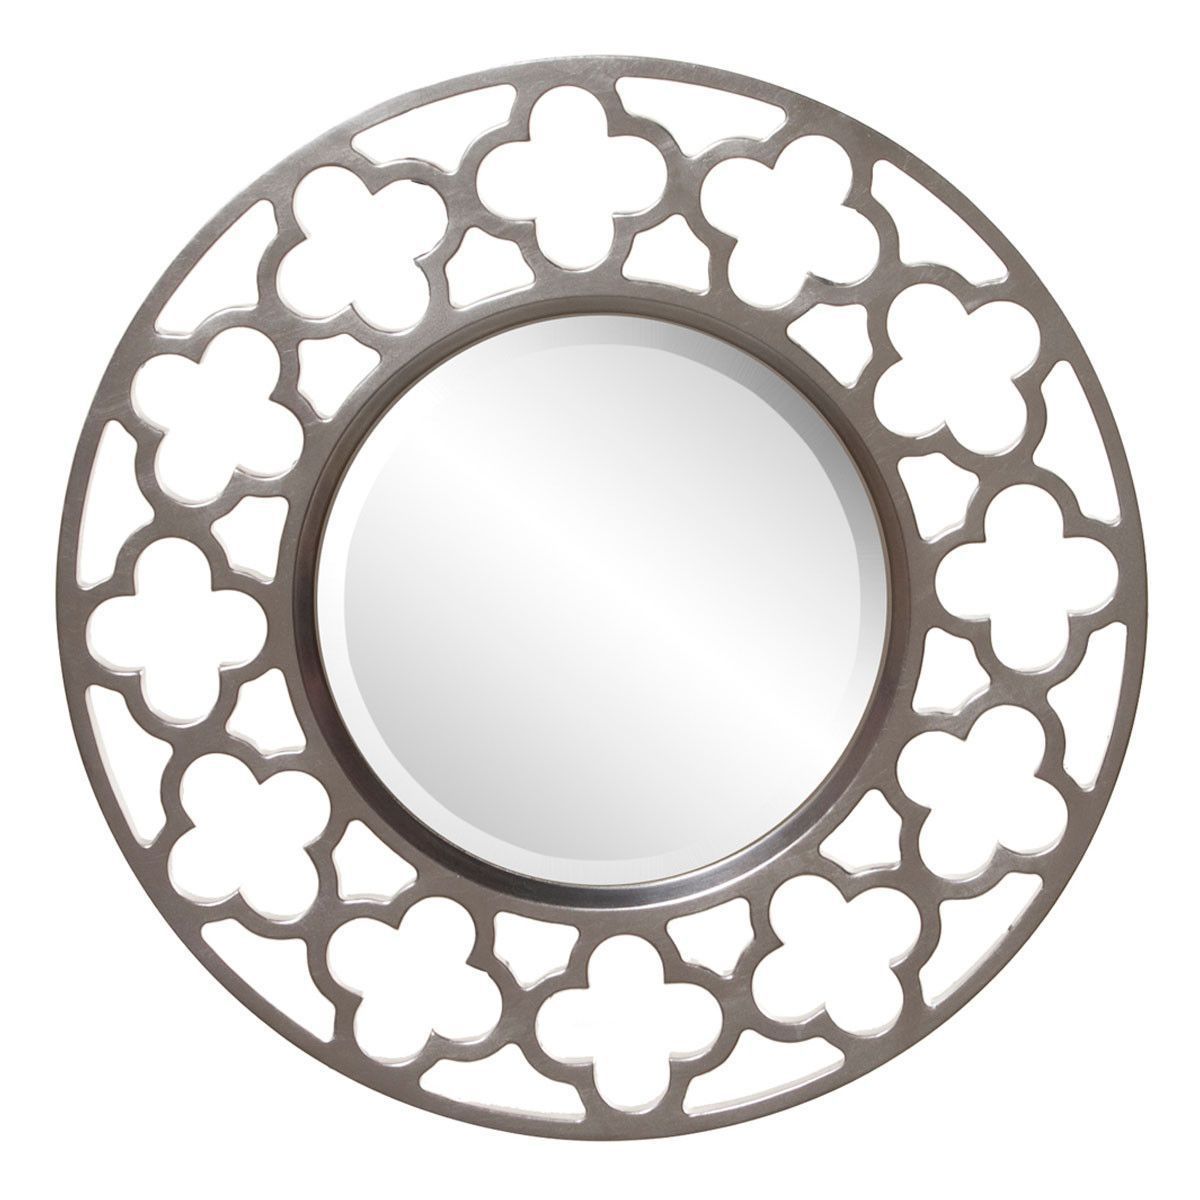 Gaelic Round Nickel Mirror | Round Wall Mirror, Contemporary Wall Throughout Brushed Nickel Round Wall Mirrors (View 13 of 15)